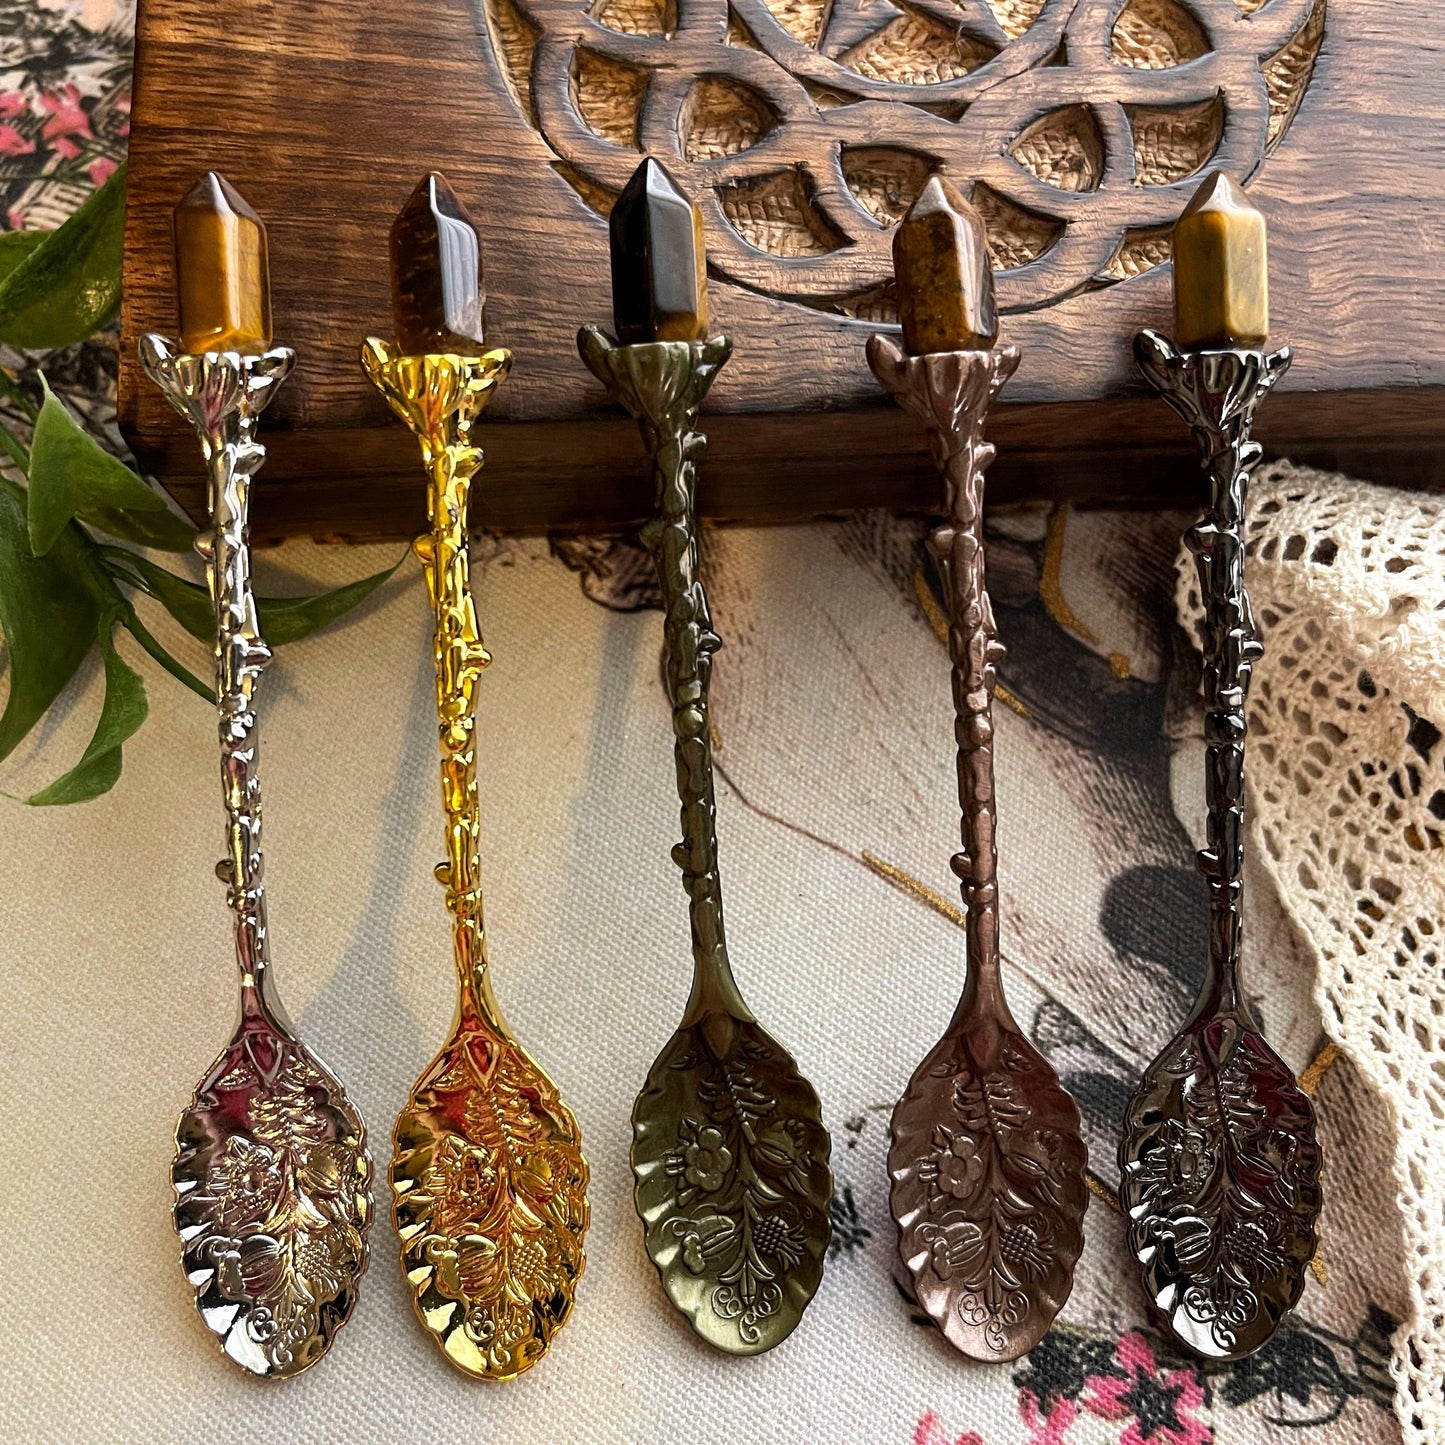 Tiger's Eye Crystal Witchy Herb / Apothecary Spoons